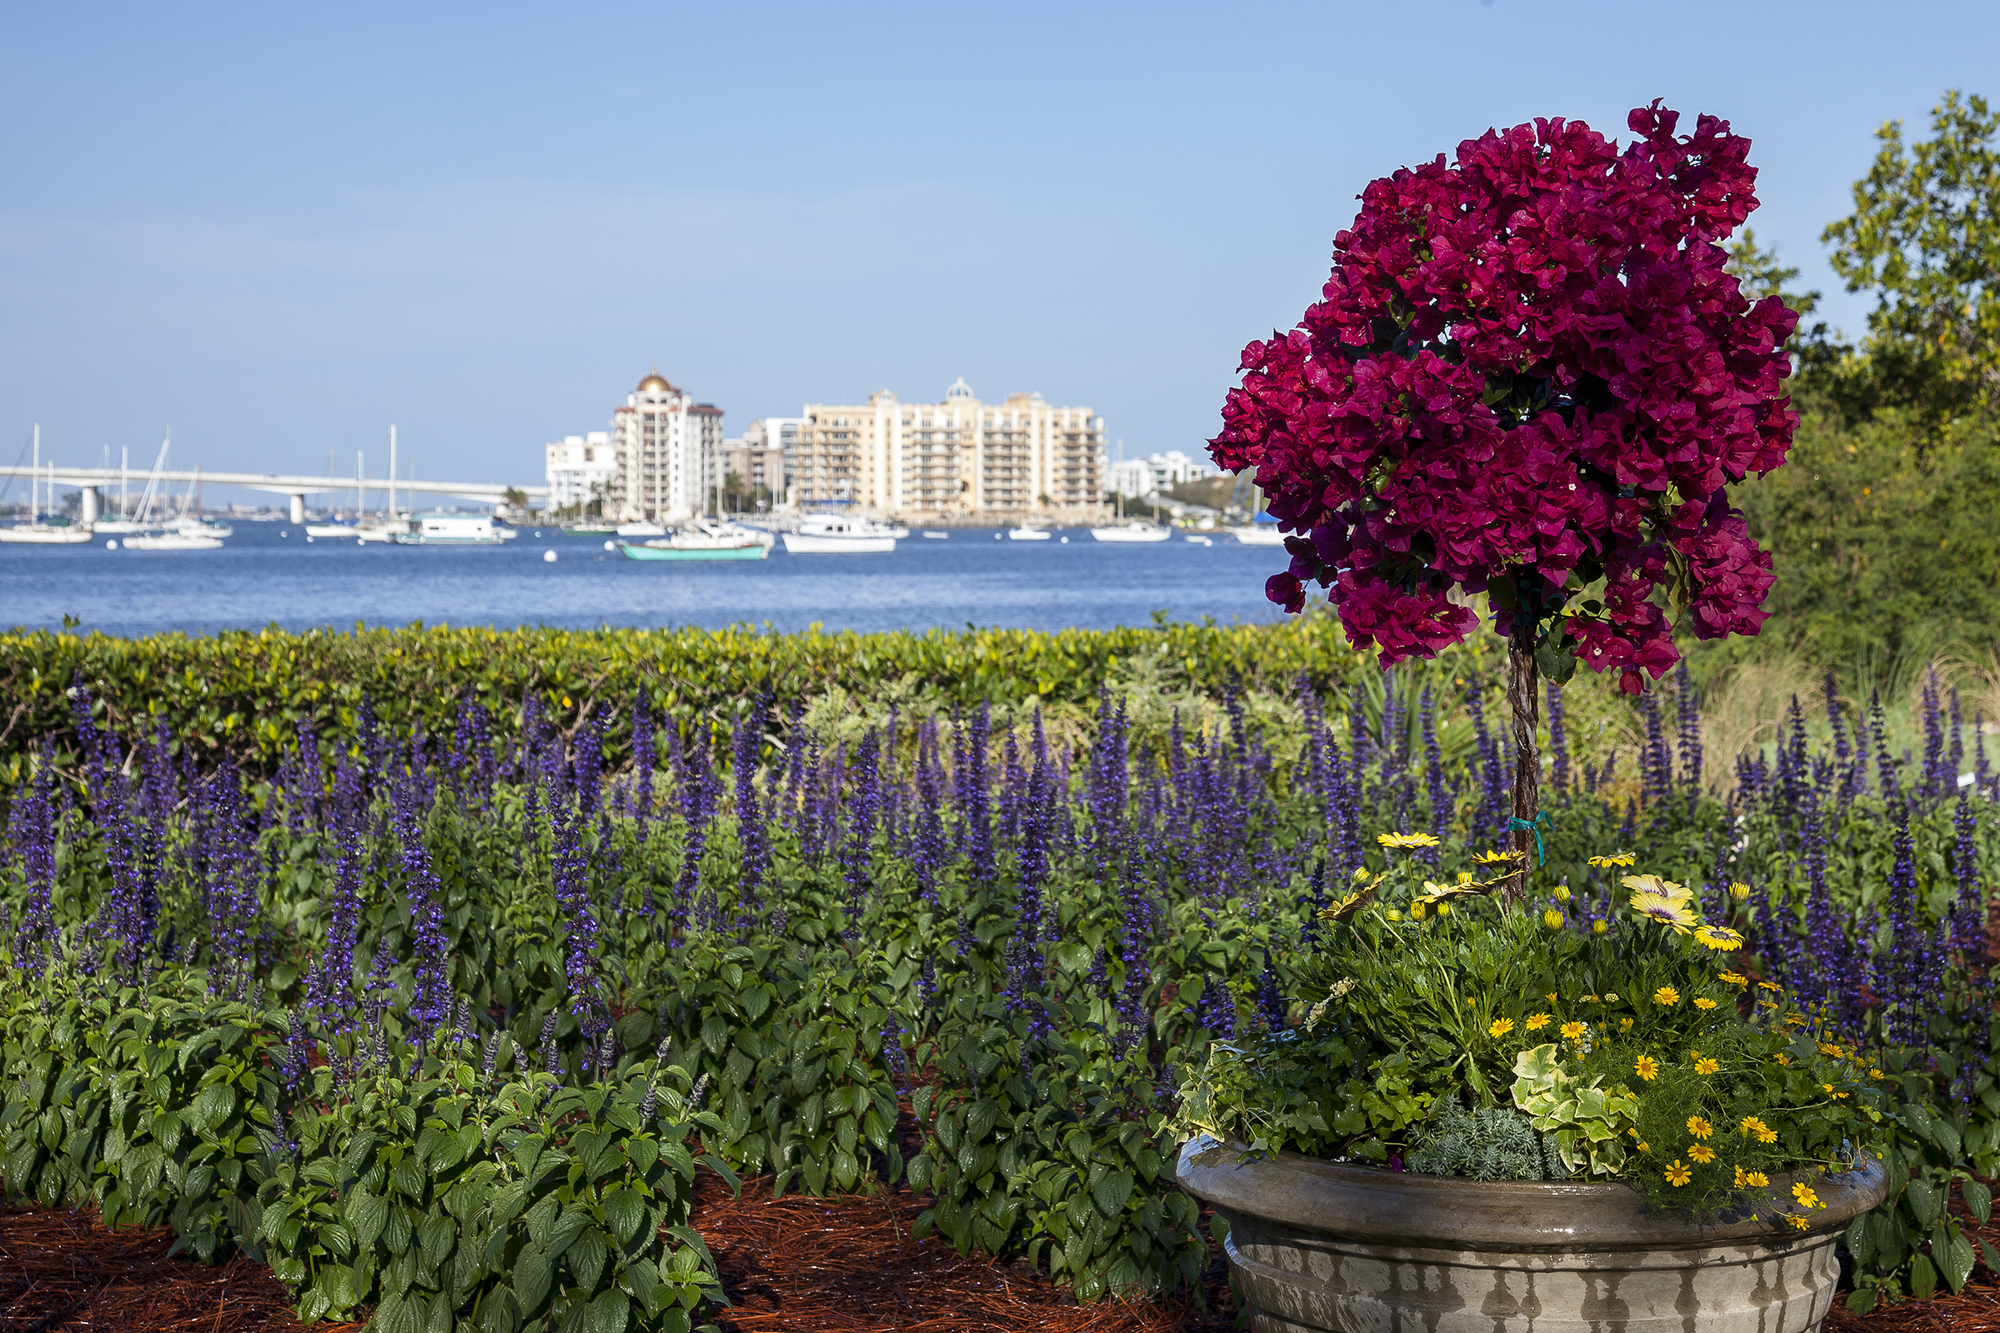 Selby’s outdoor gardens are enhanced to evoke the French Riviera. Photo by Matthew Holler.